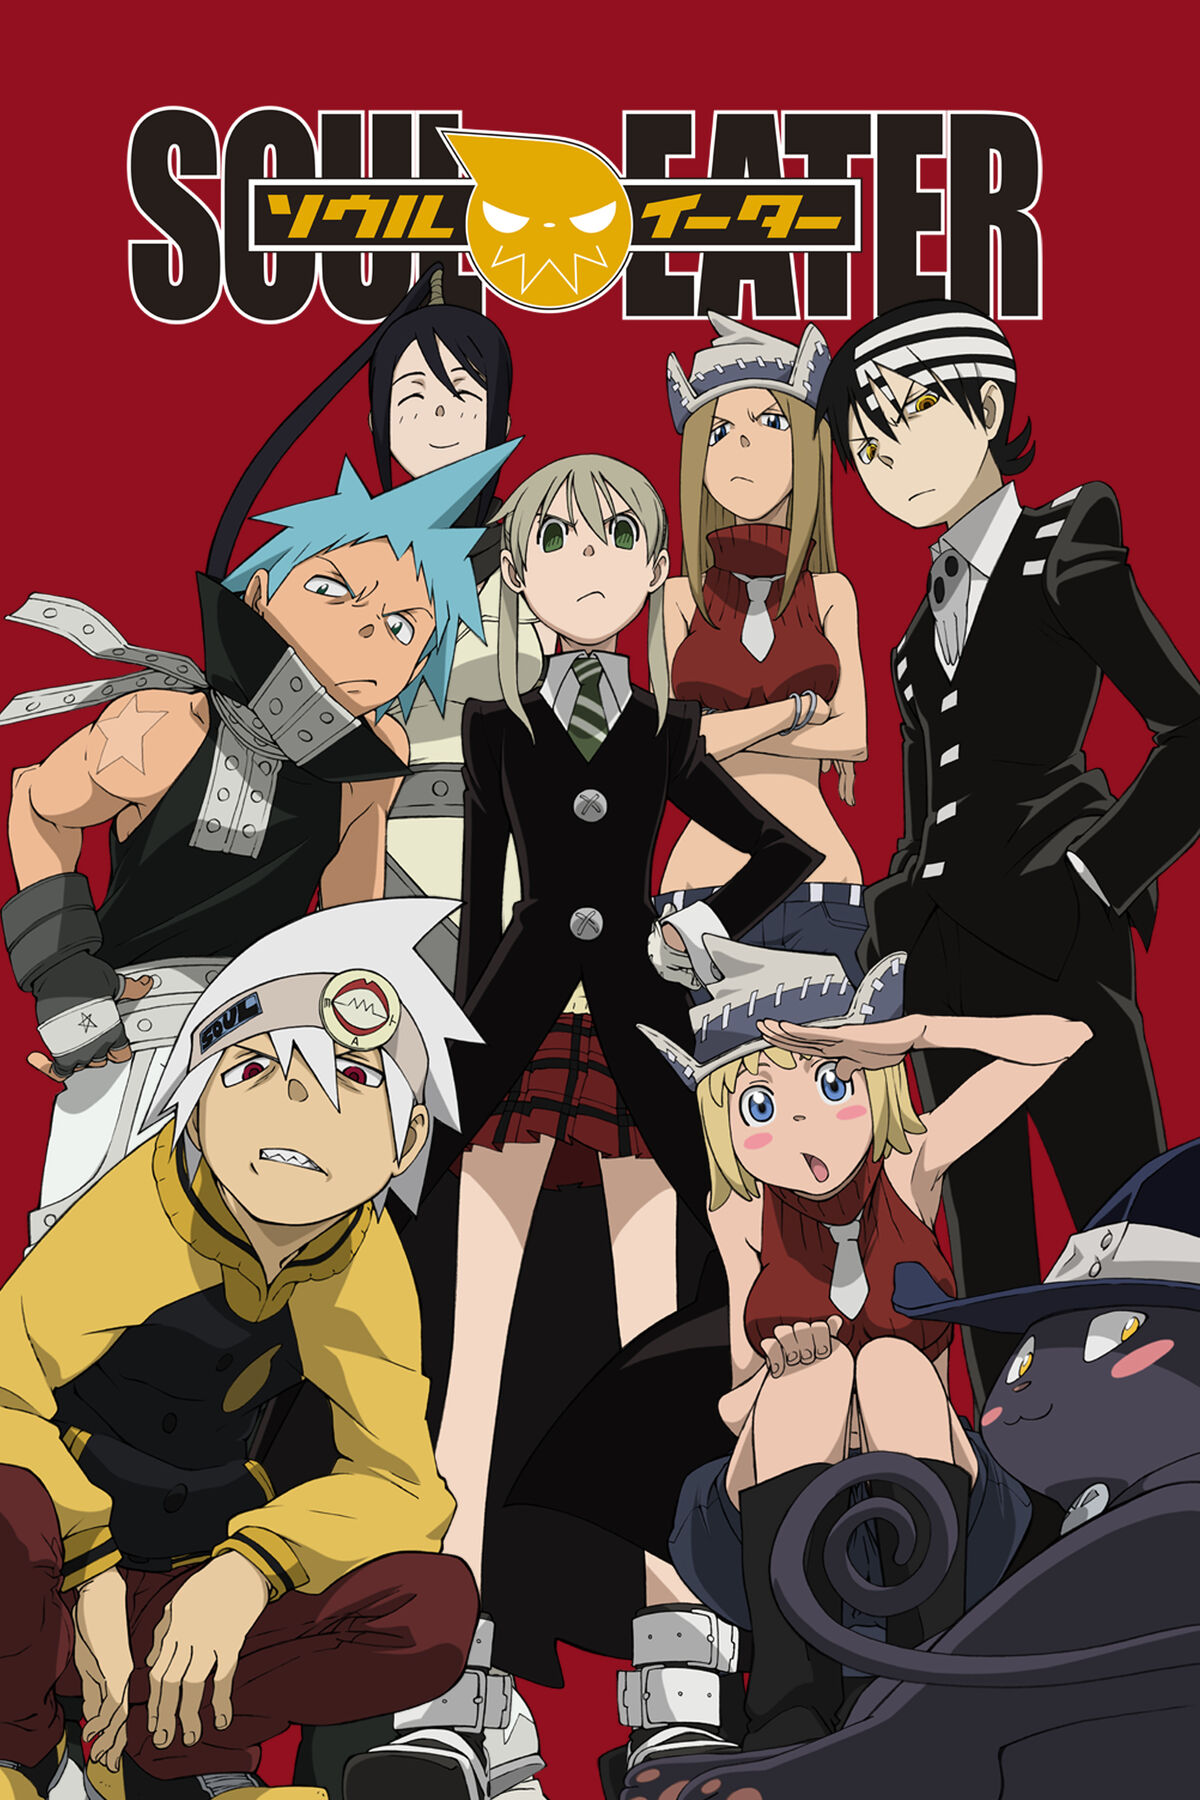 Soul Eater Premeres on Toonami, Available in Full on Netflix (51